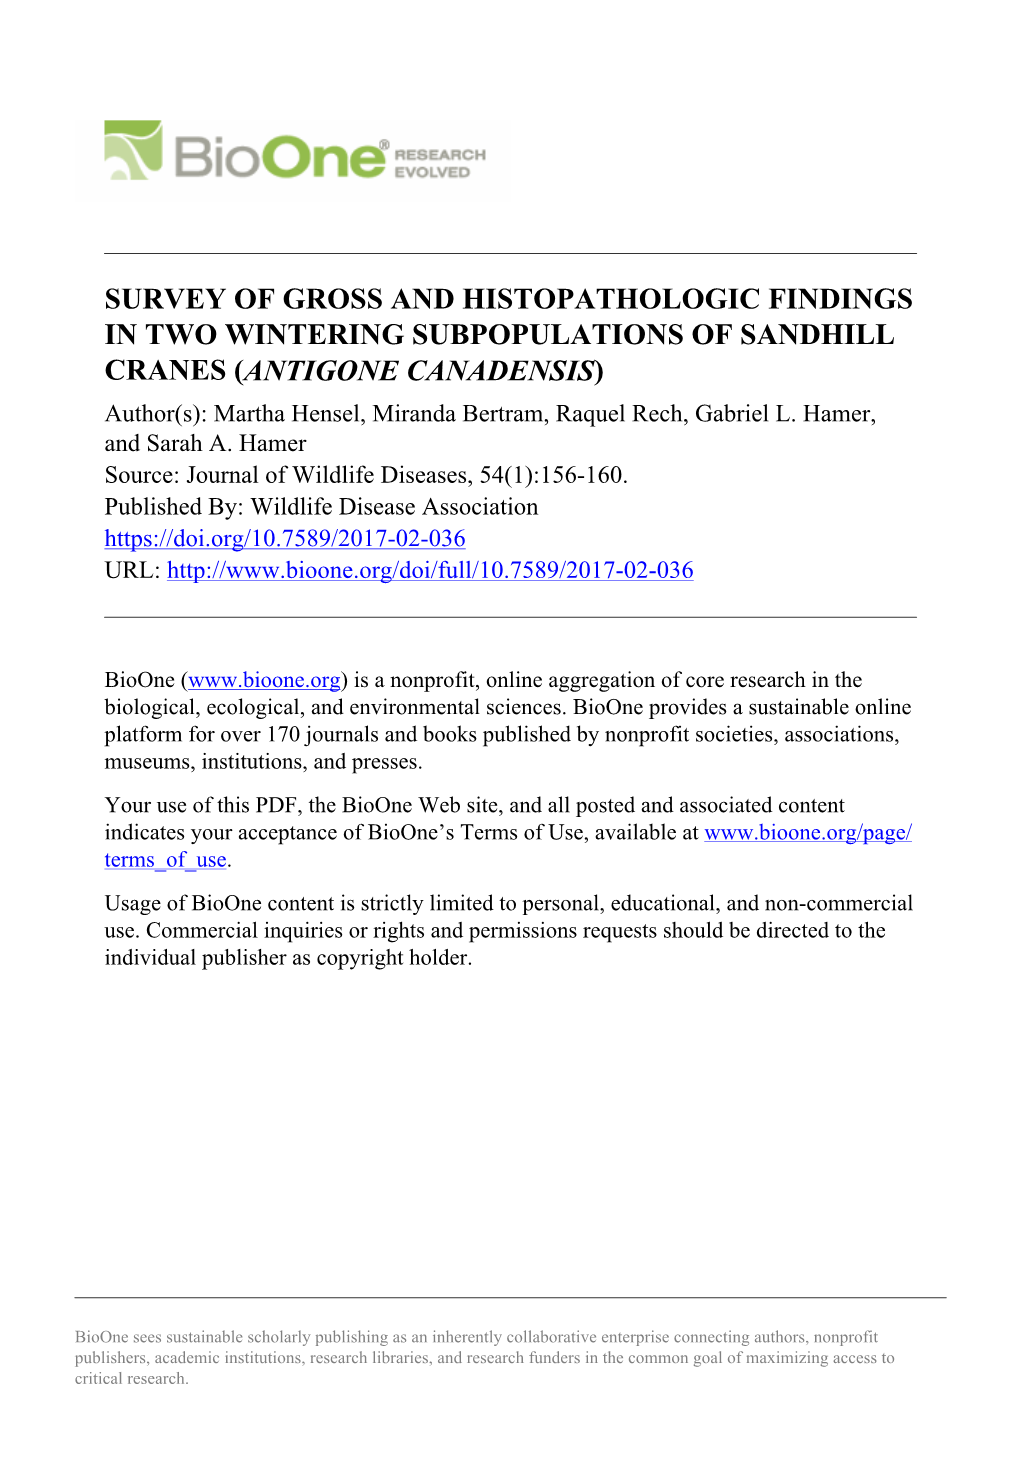 Survey of Gross and Histopathologic Findings In